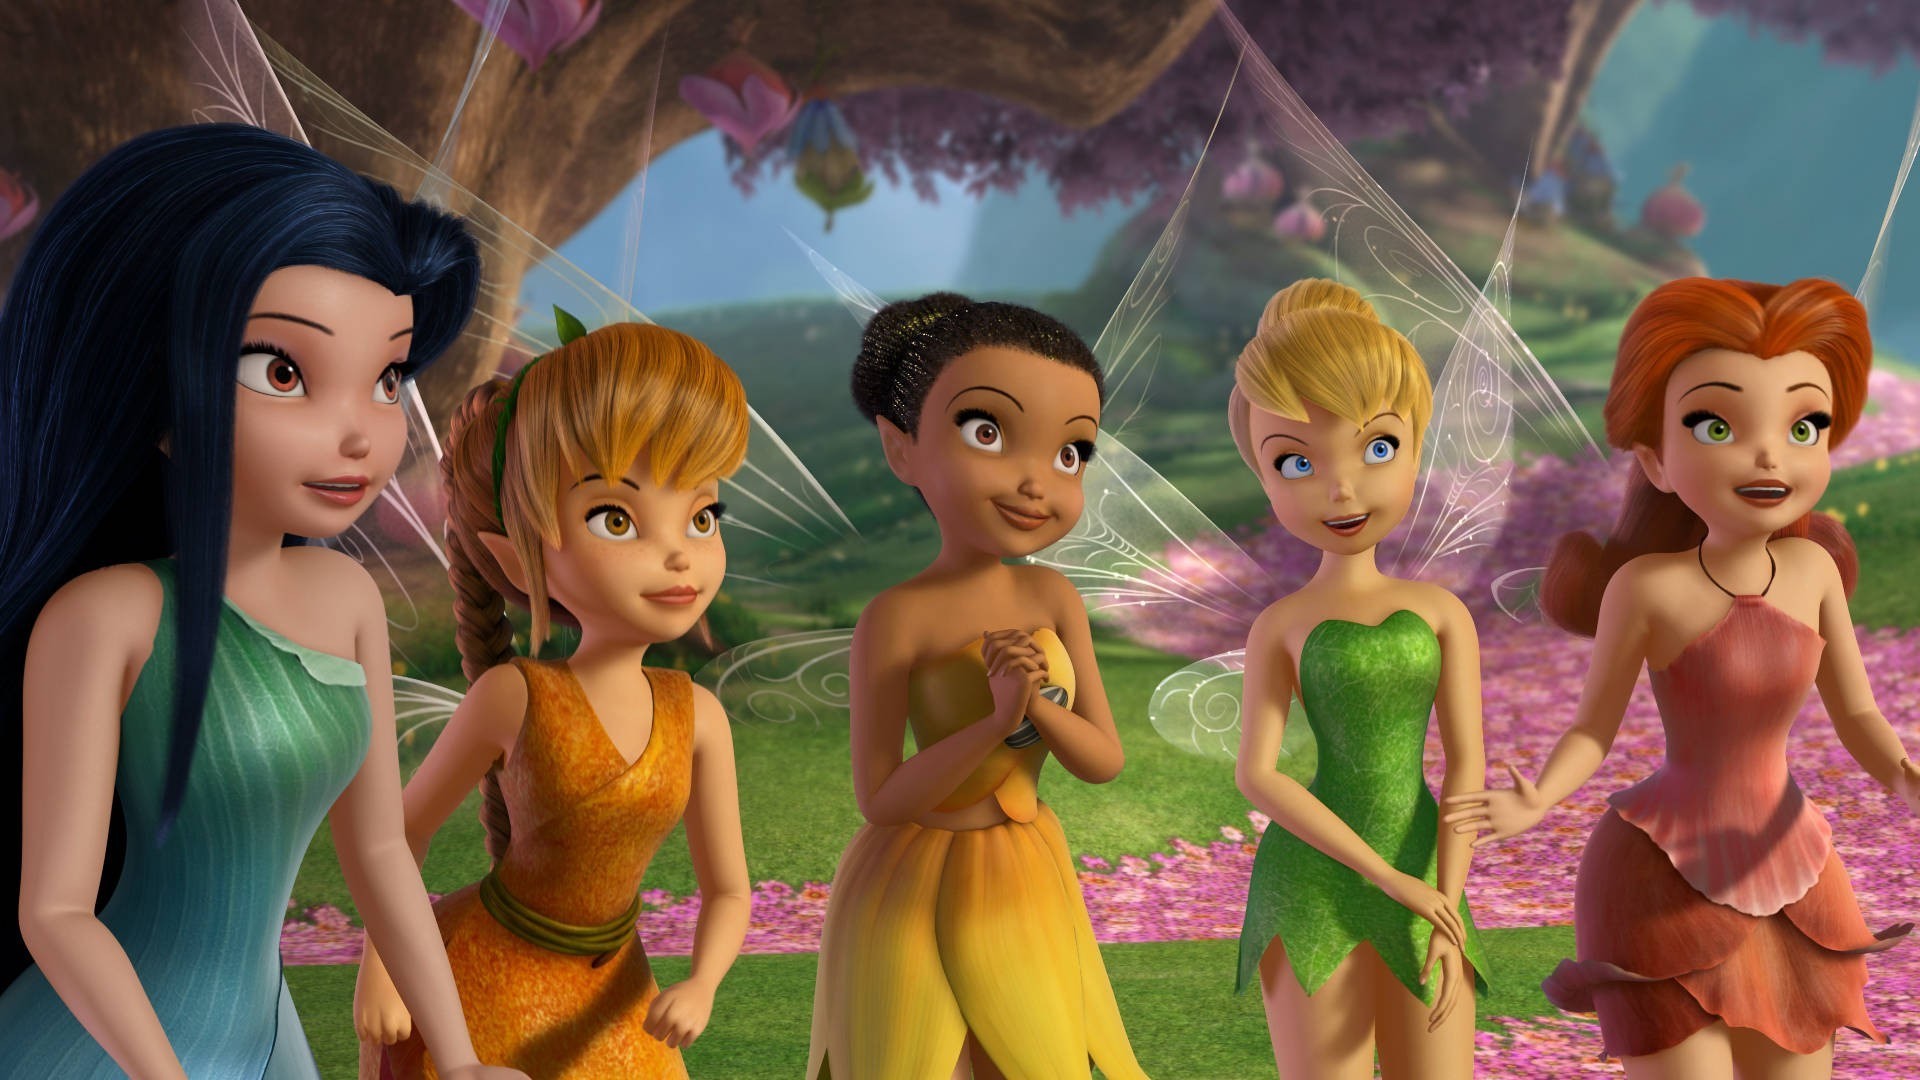 1920x1080 Disney Fairies HD Wallpapers: Find the best Disney Fairies HD Wallpapers  for your computers, laptops and mobiles desktop background screen.